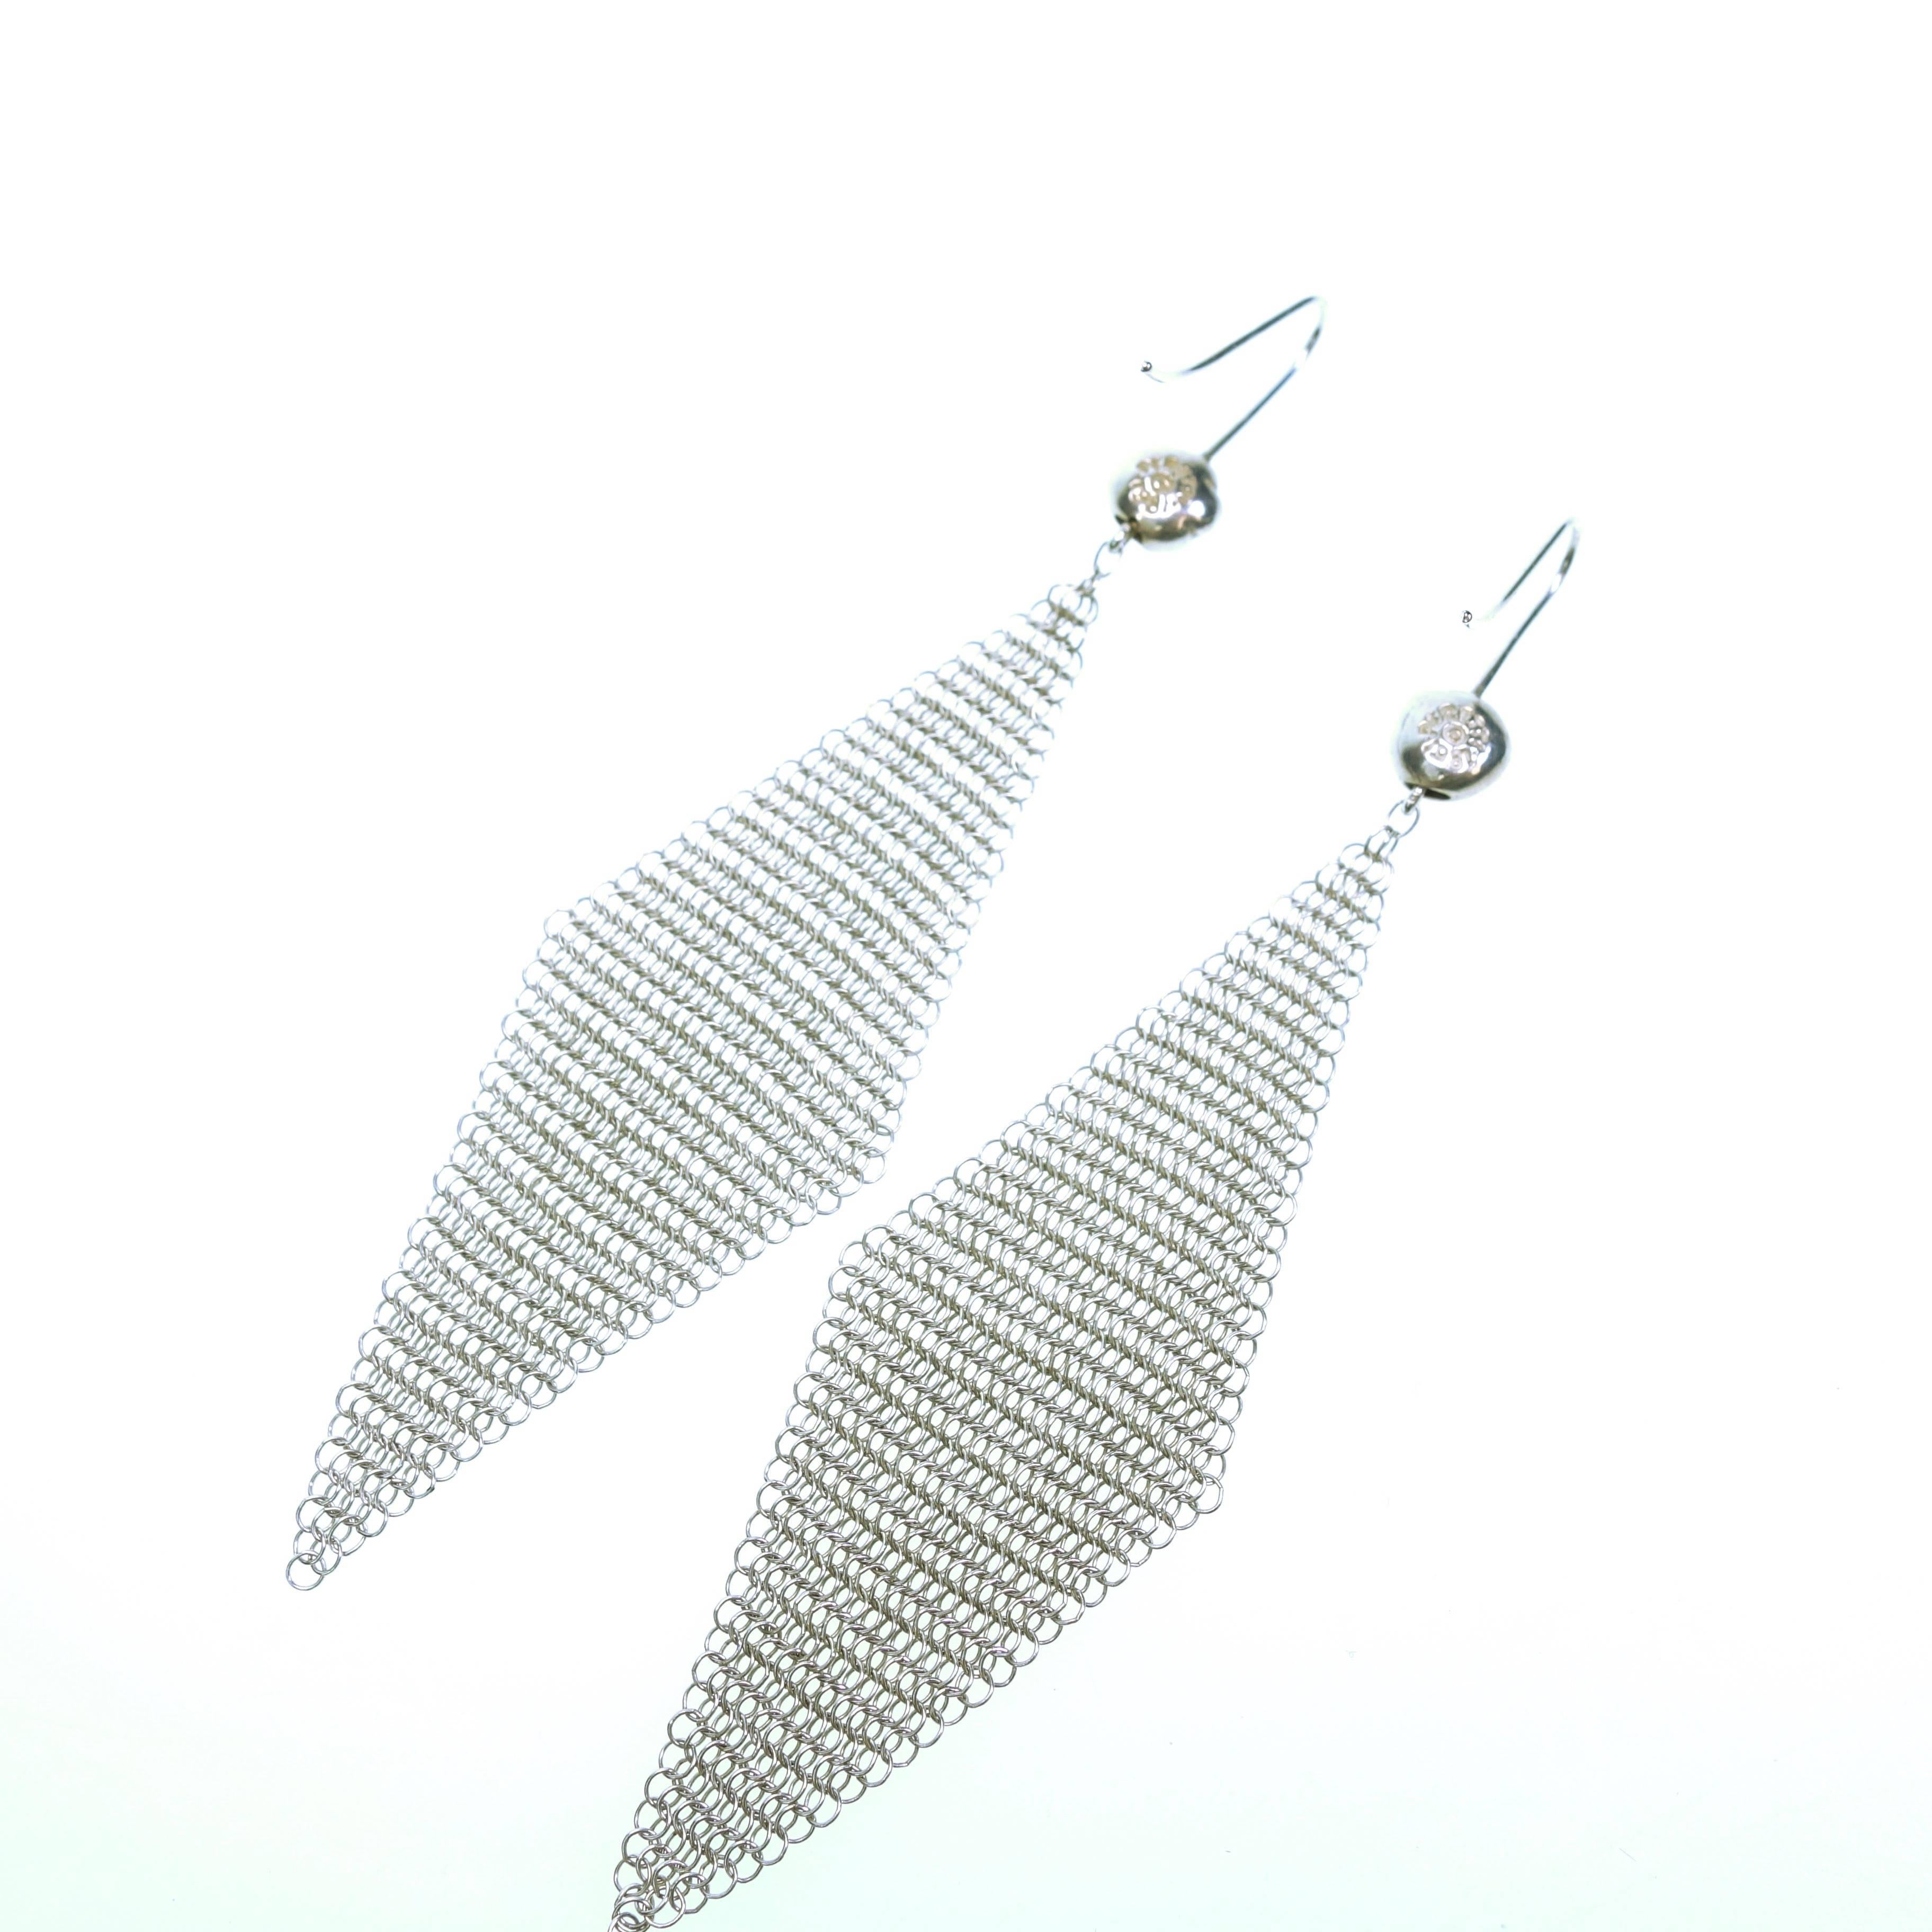 Tiffany & Co Elsa Peretti Mesh Earrings in Sterling Silver.
The form is malleable and ergonomic in the way it drapes over the body's contours. Original designs copyrighted by Elsa Peretti.
Hallmarked: on the back of the silver balls: T & Co.